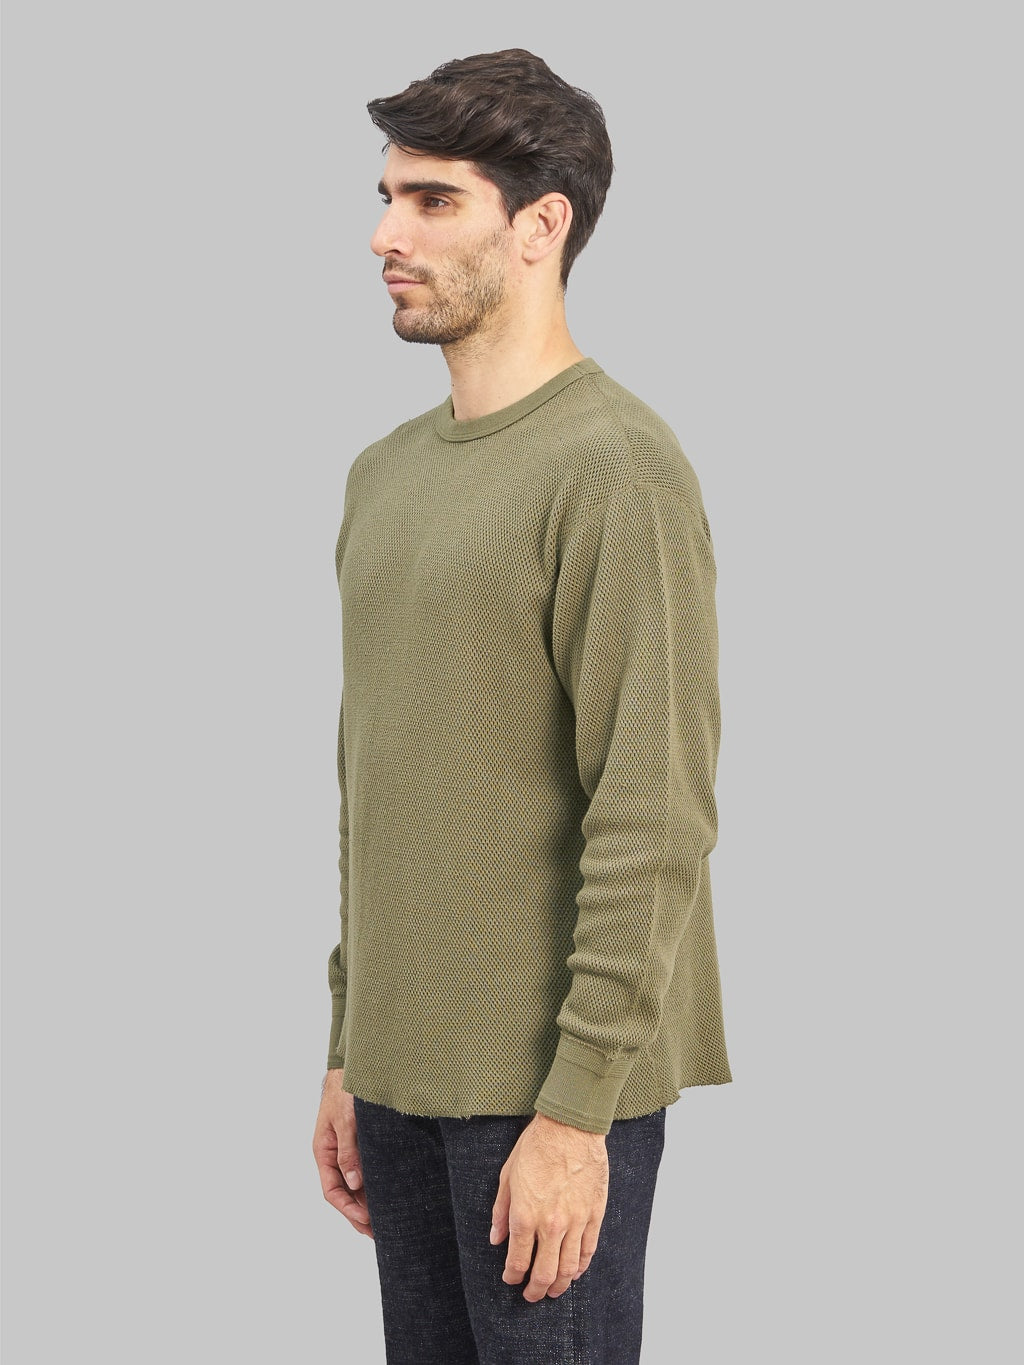 Loop & Weft Double Face Hex Honeycomb Crewneck Thermal Army Olive